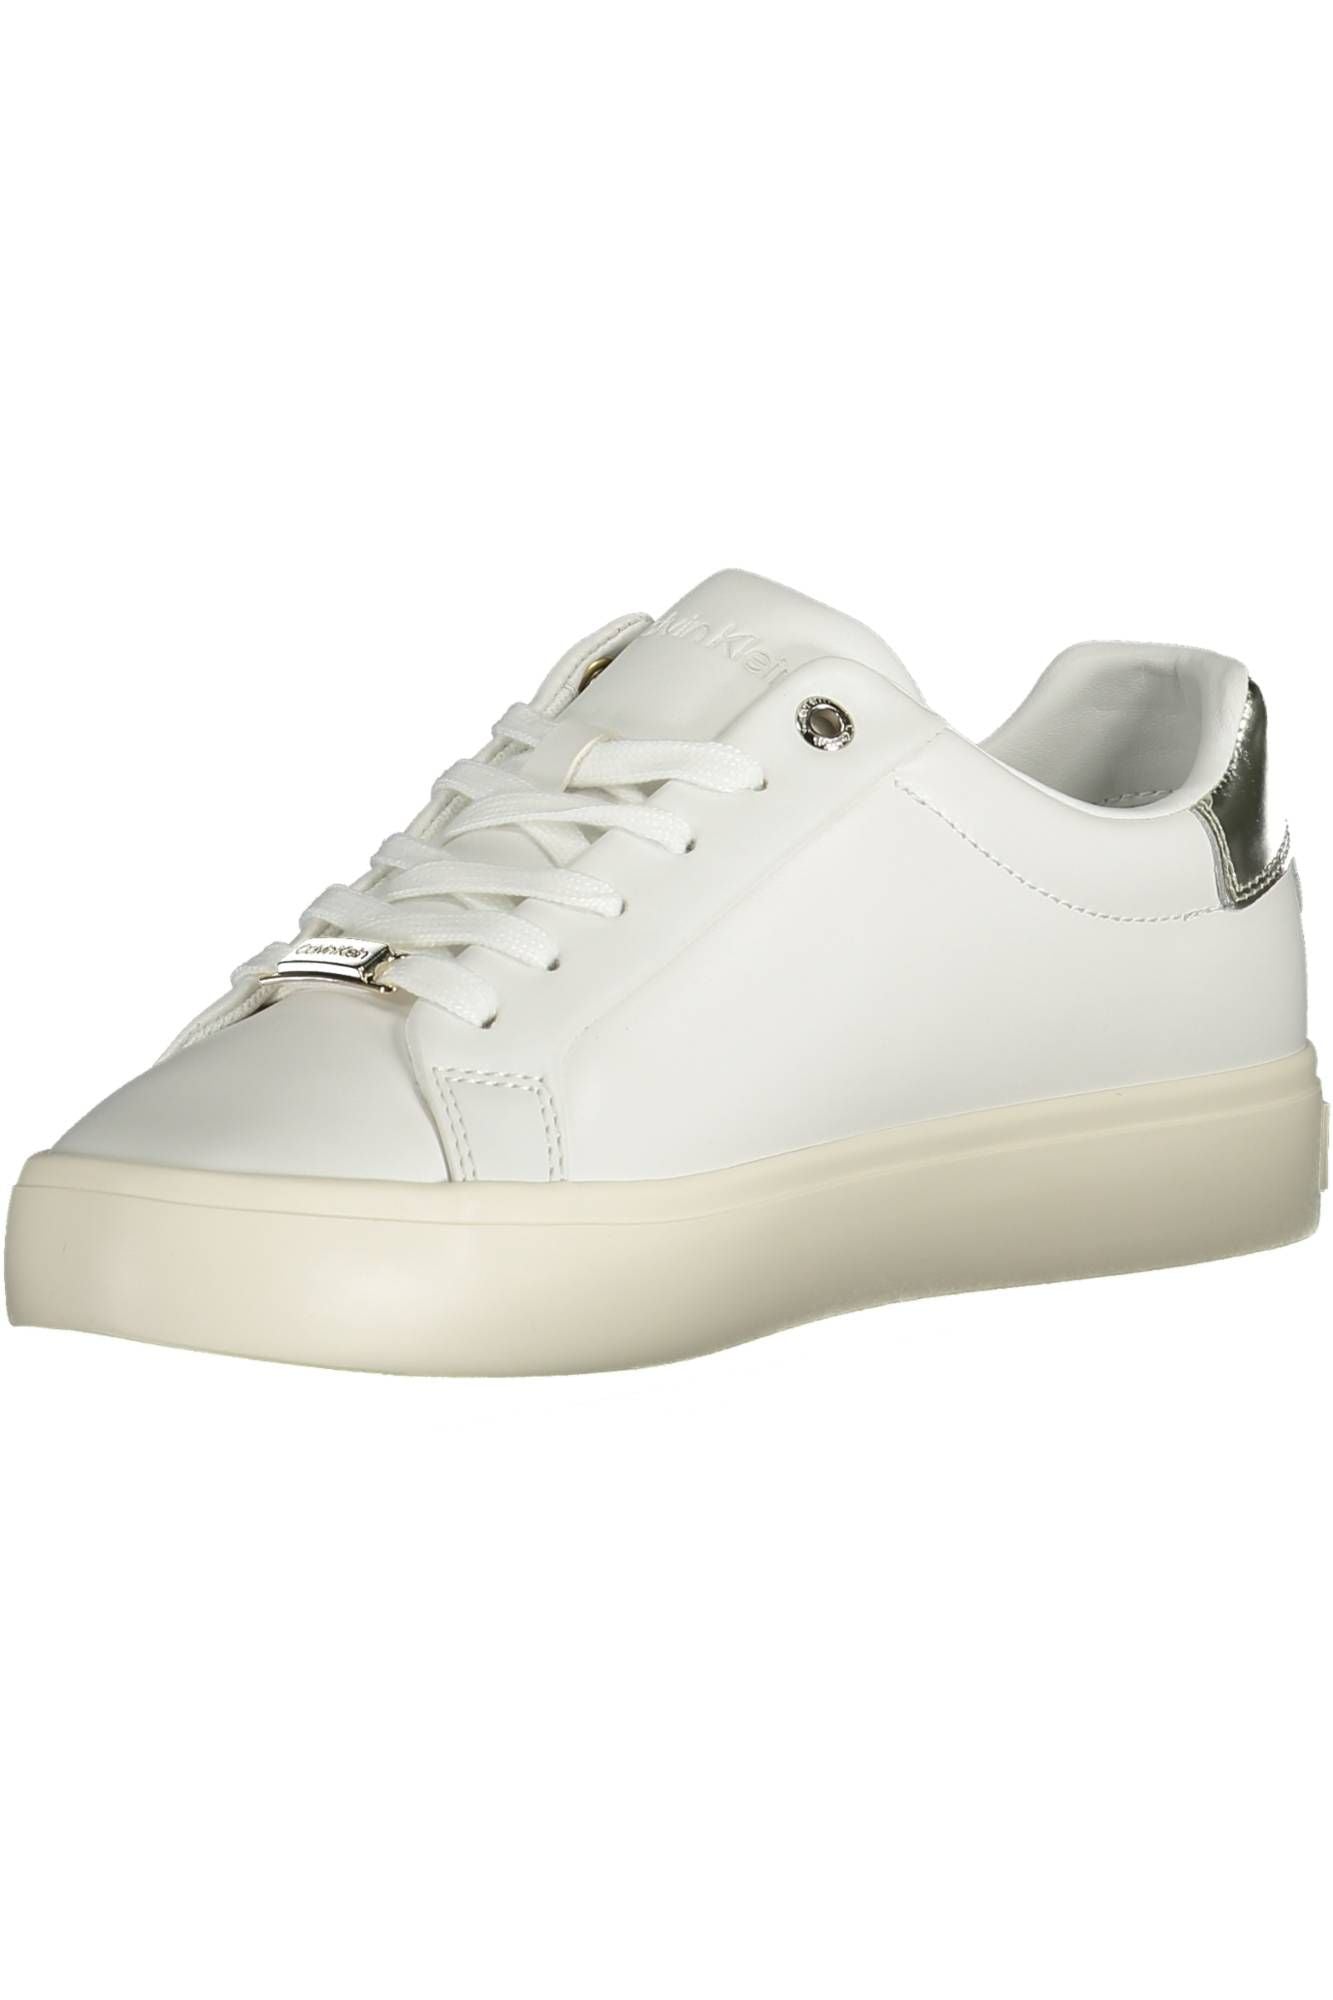 Calvin Klein Elegant White Contrast Lace-Up Sneakers